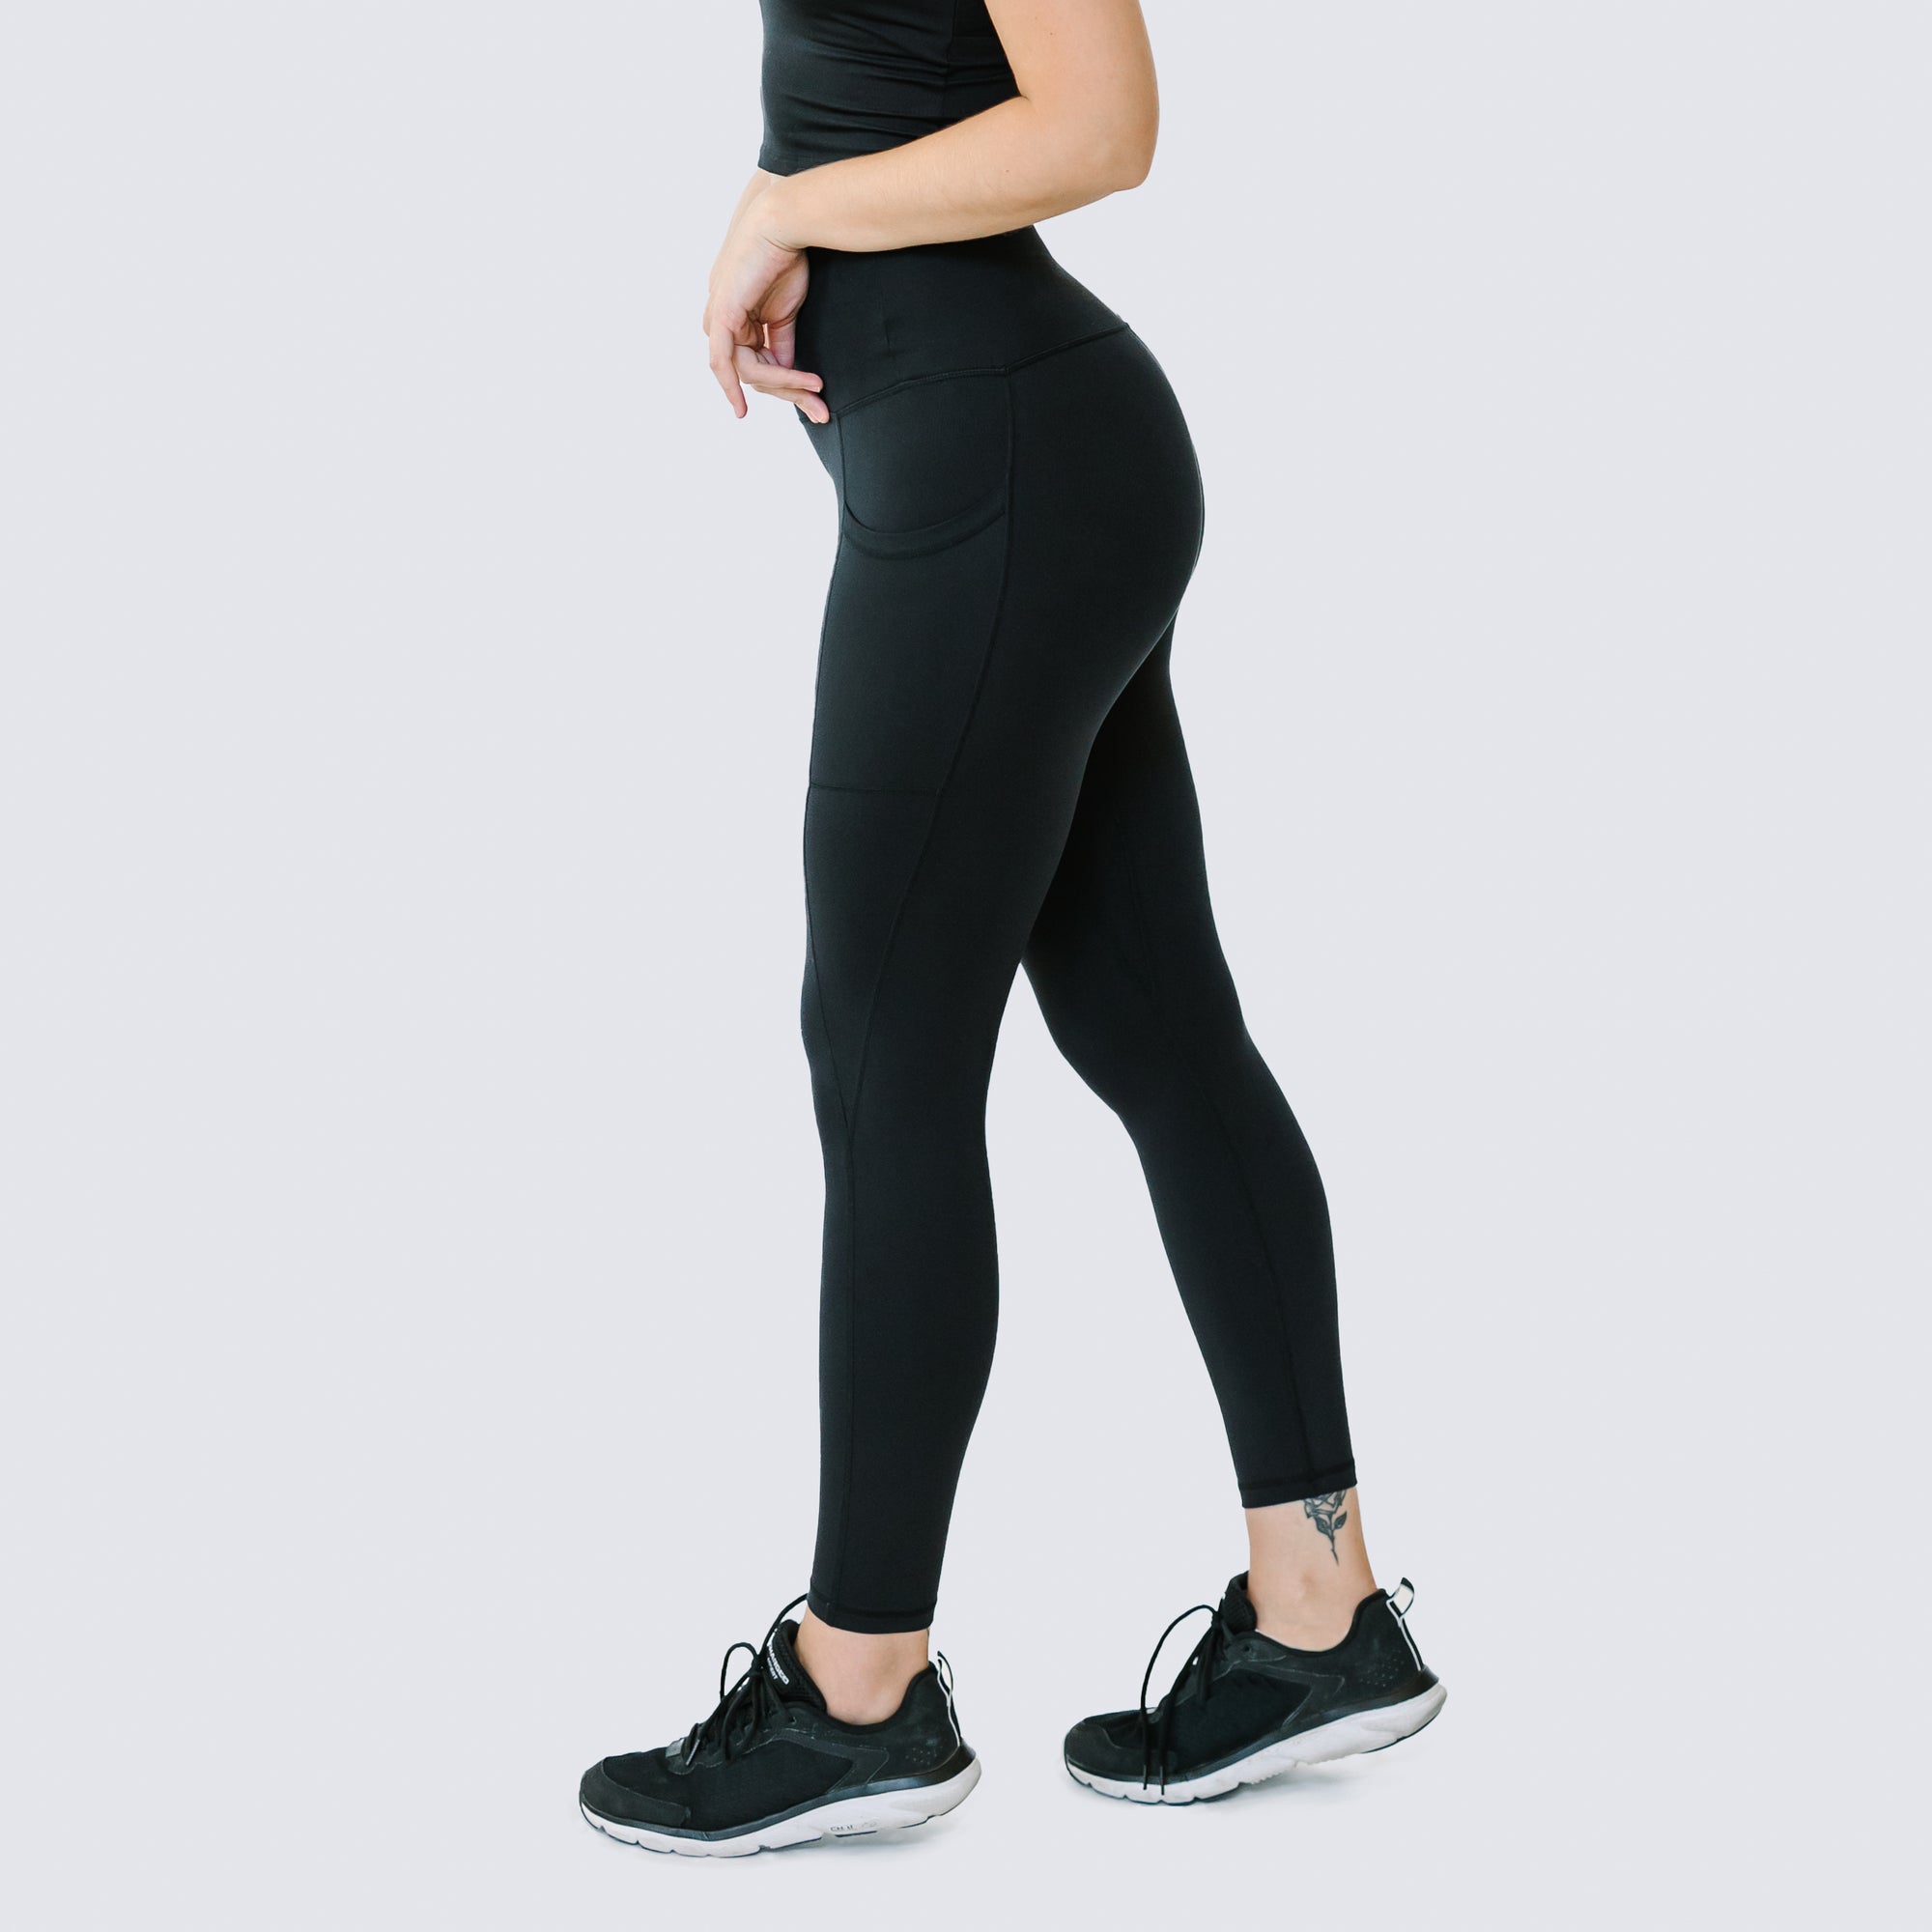 SoftLuxe Stay Put Leggings - Solid Black – Love and Fit